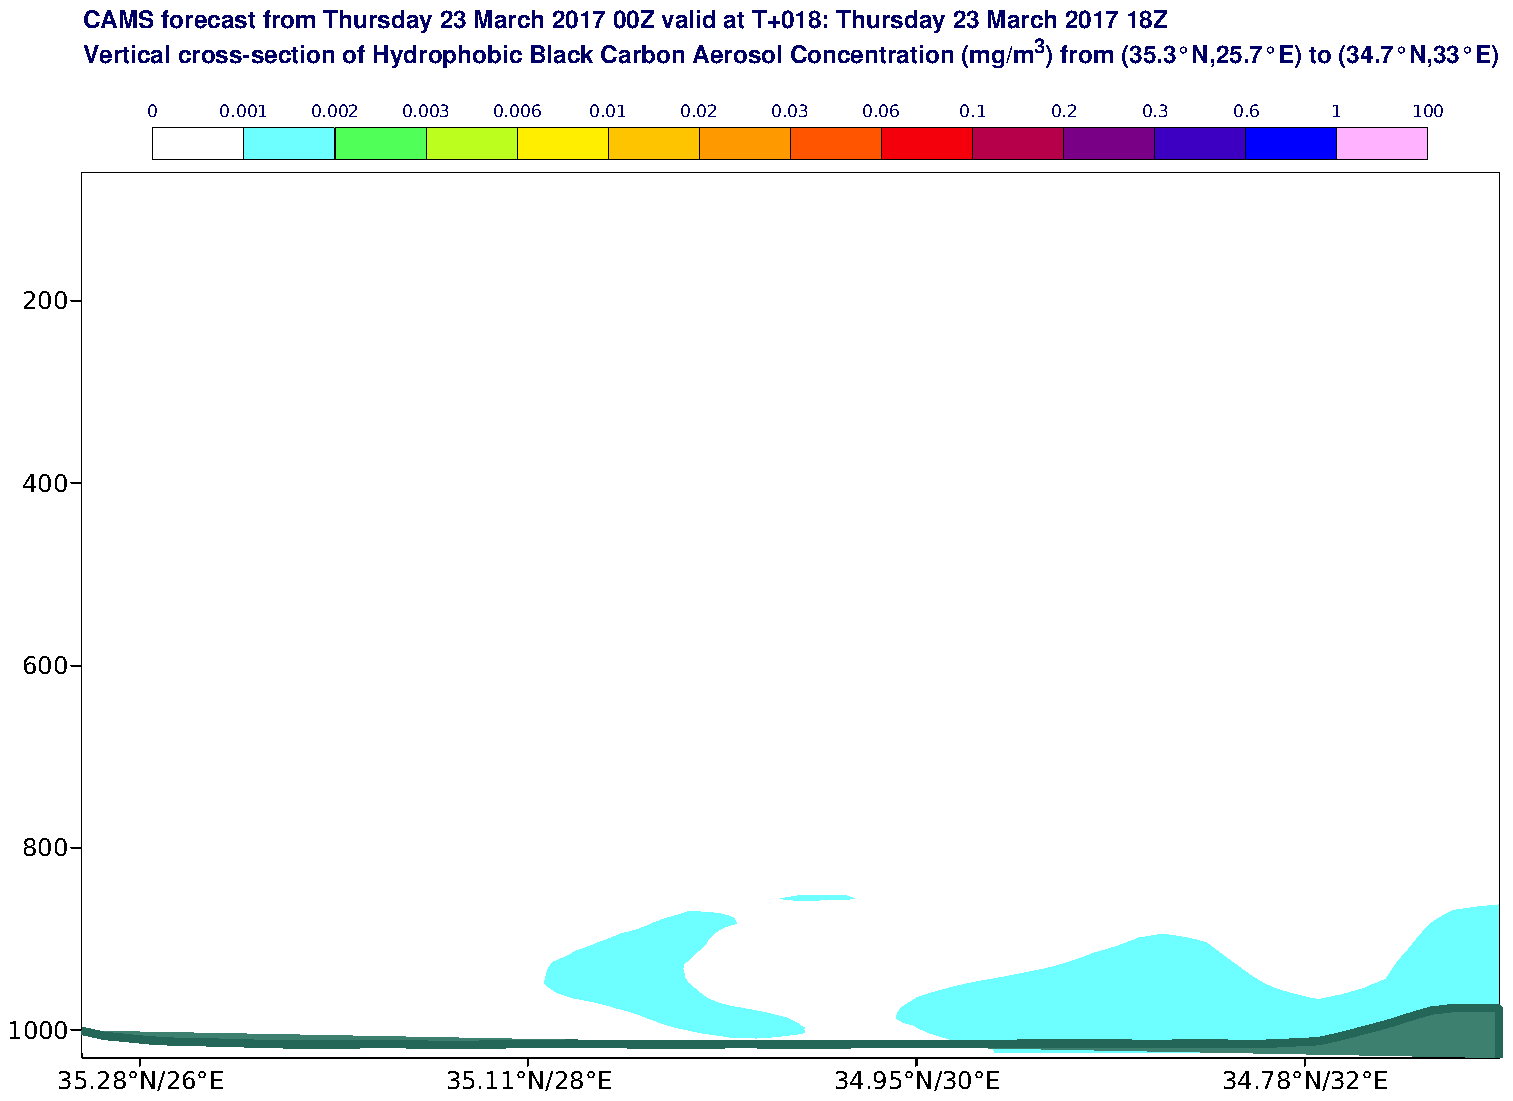 Vertical cross-section of Hydrophobic Black Carbon Aerosol Concentration (mg/m3) valid at T18 - 2017-03-23 18:00